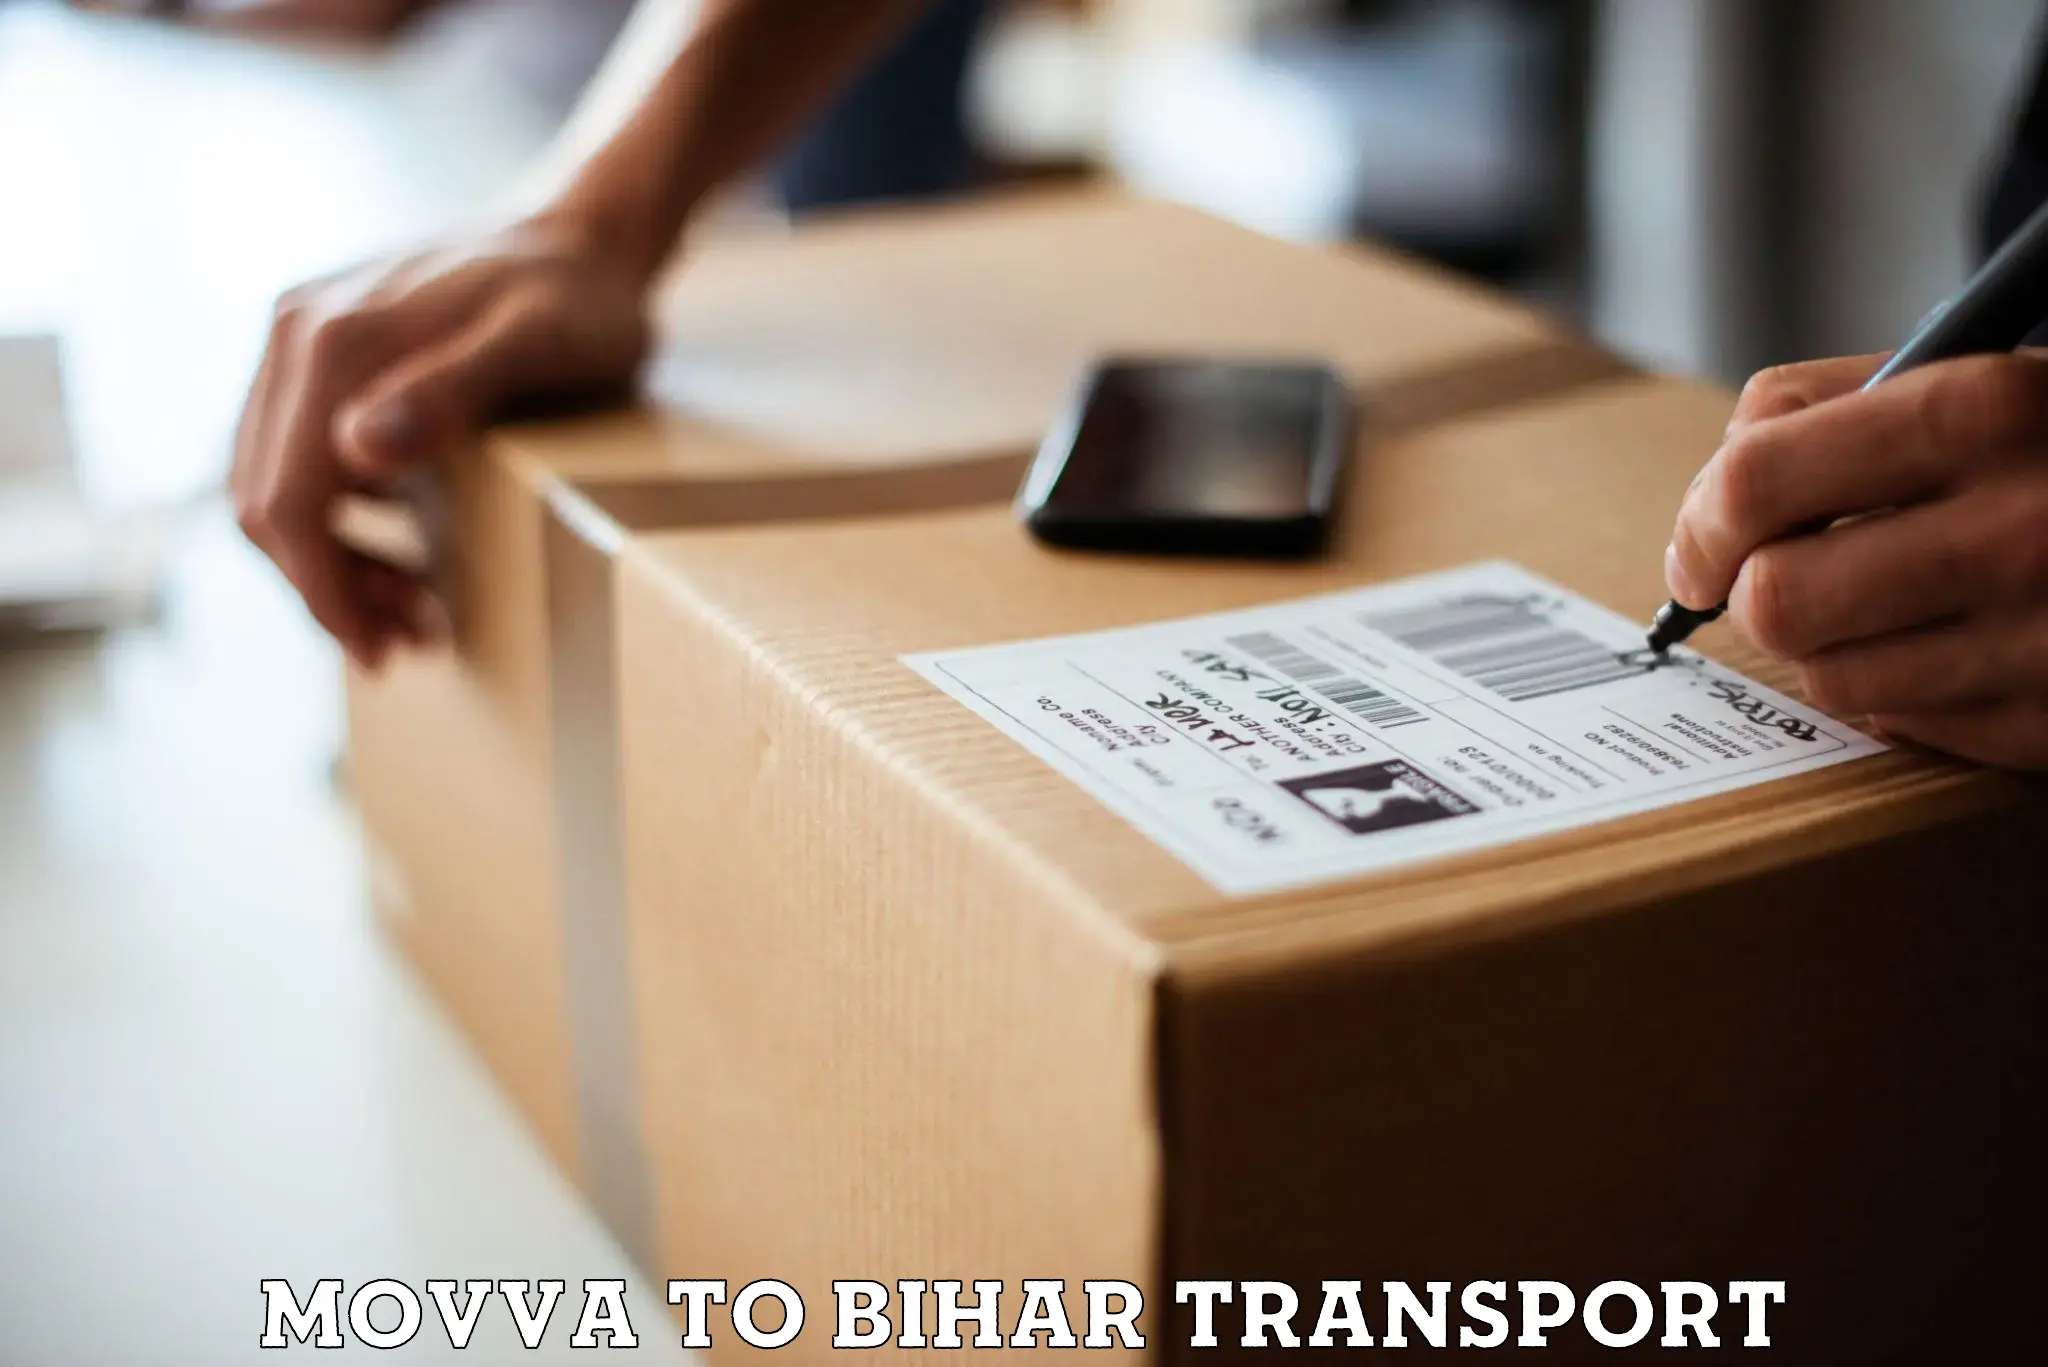 Express transport services Movva to Sursand